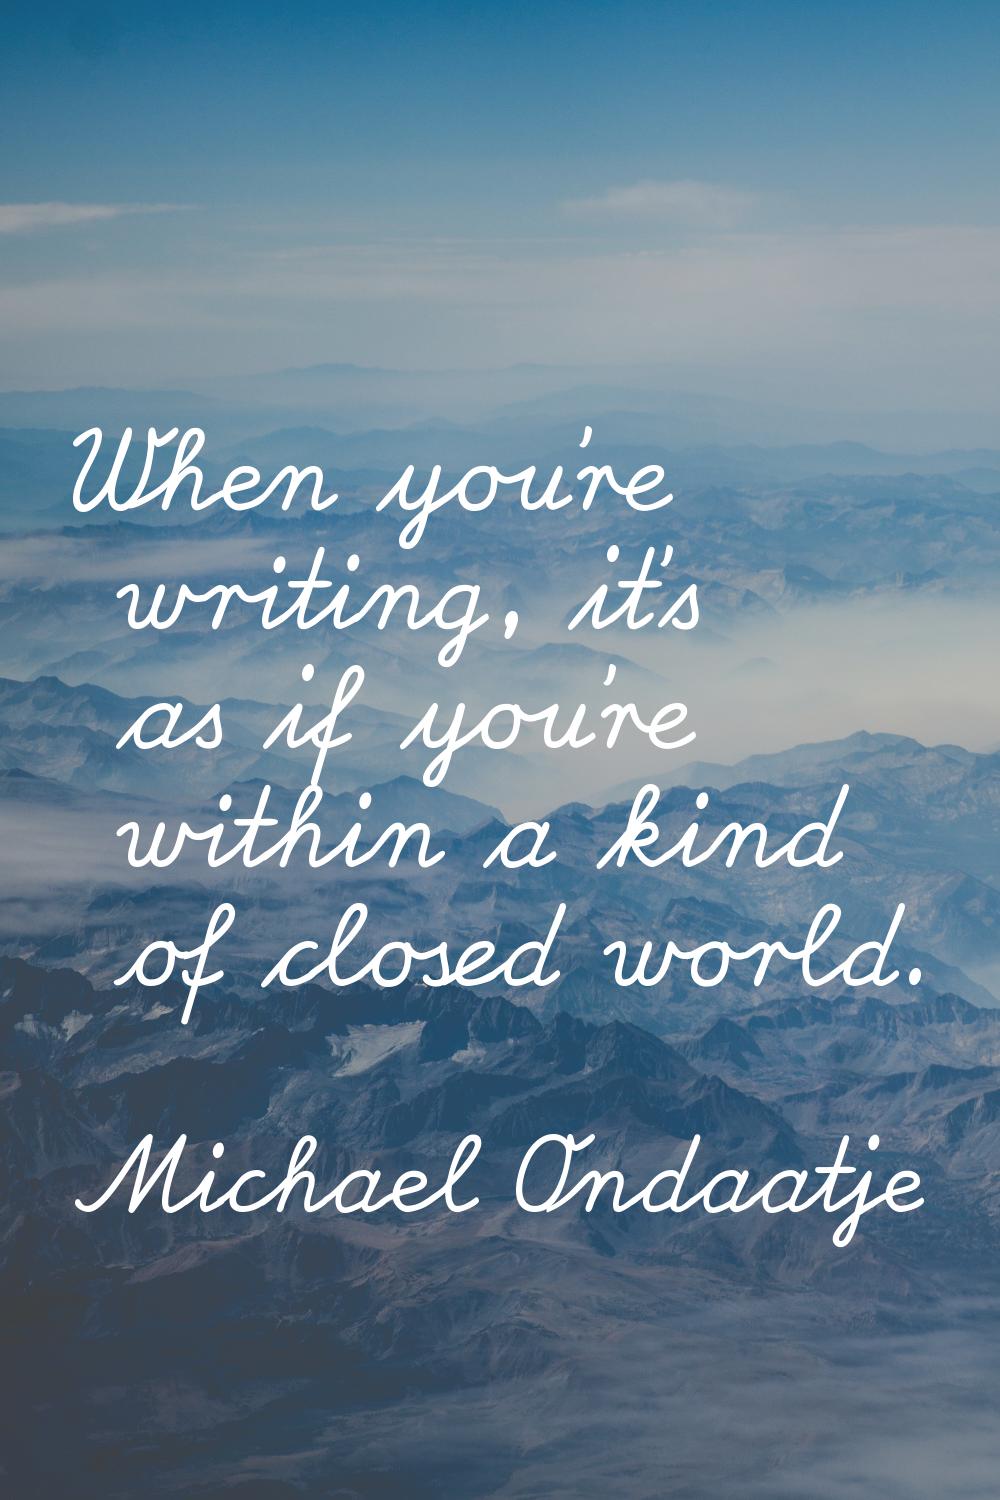 When you're writing, it's as if you're within a kind of closed world.